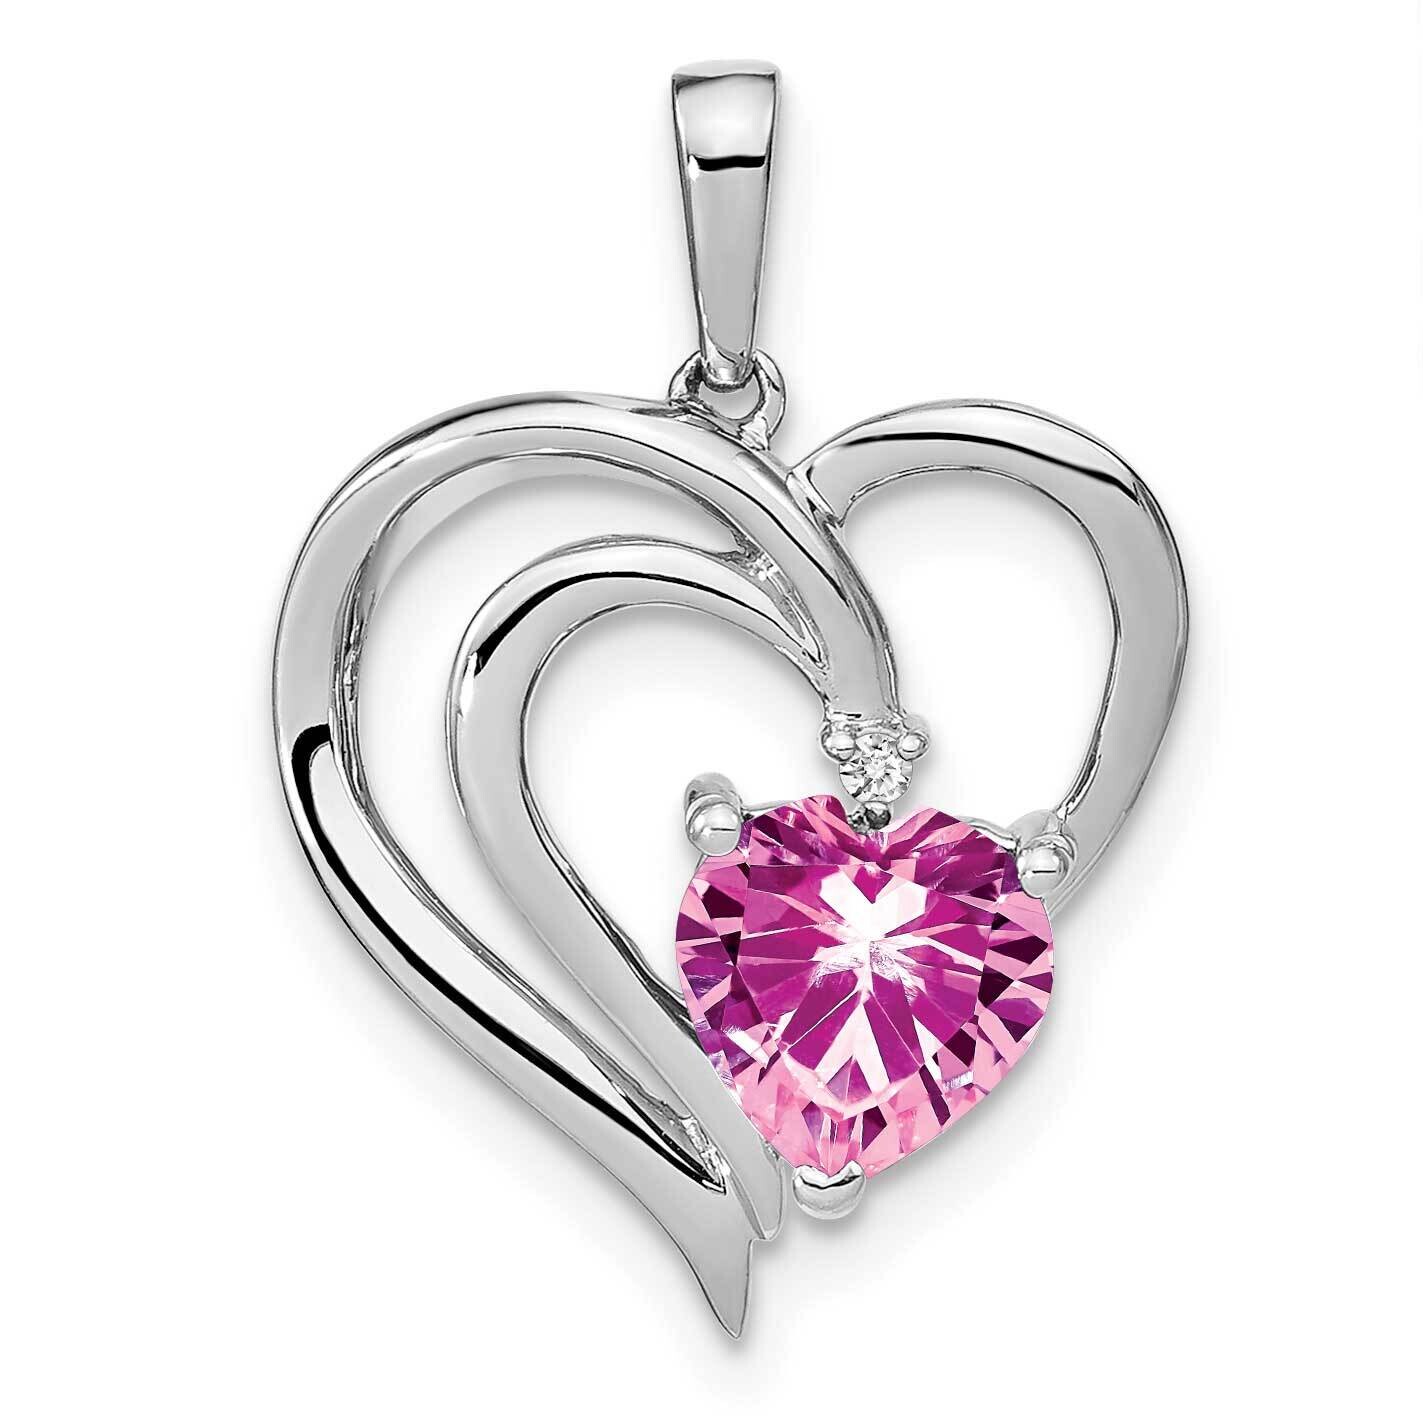 Rhod-Plated Created Pink Sapphire/Diamond Pendant Sterling Silver PM7025-CPS-001-SSA